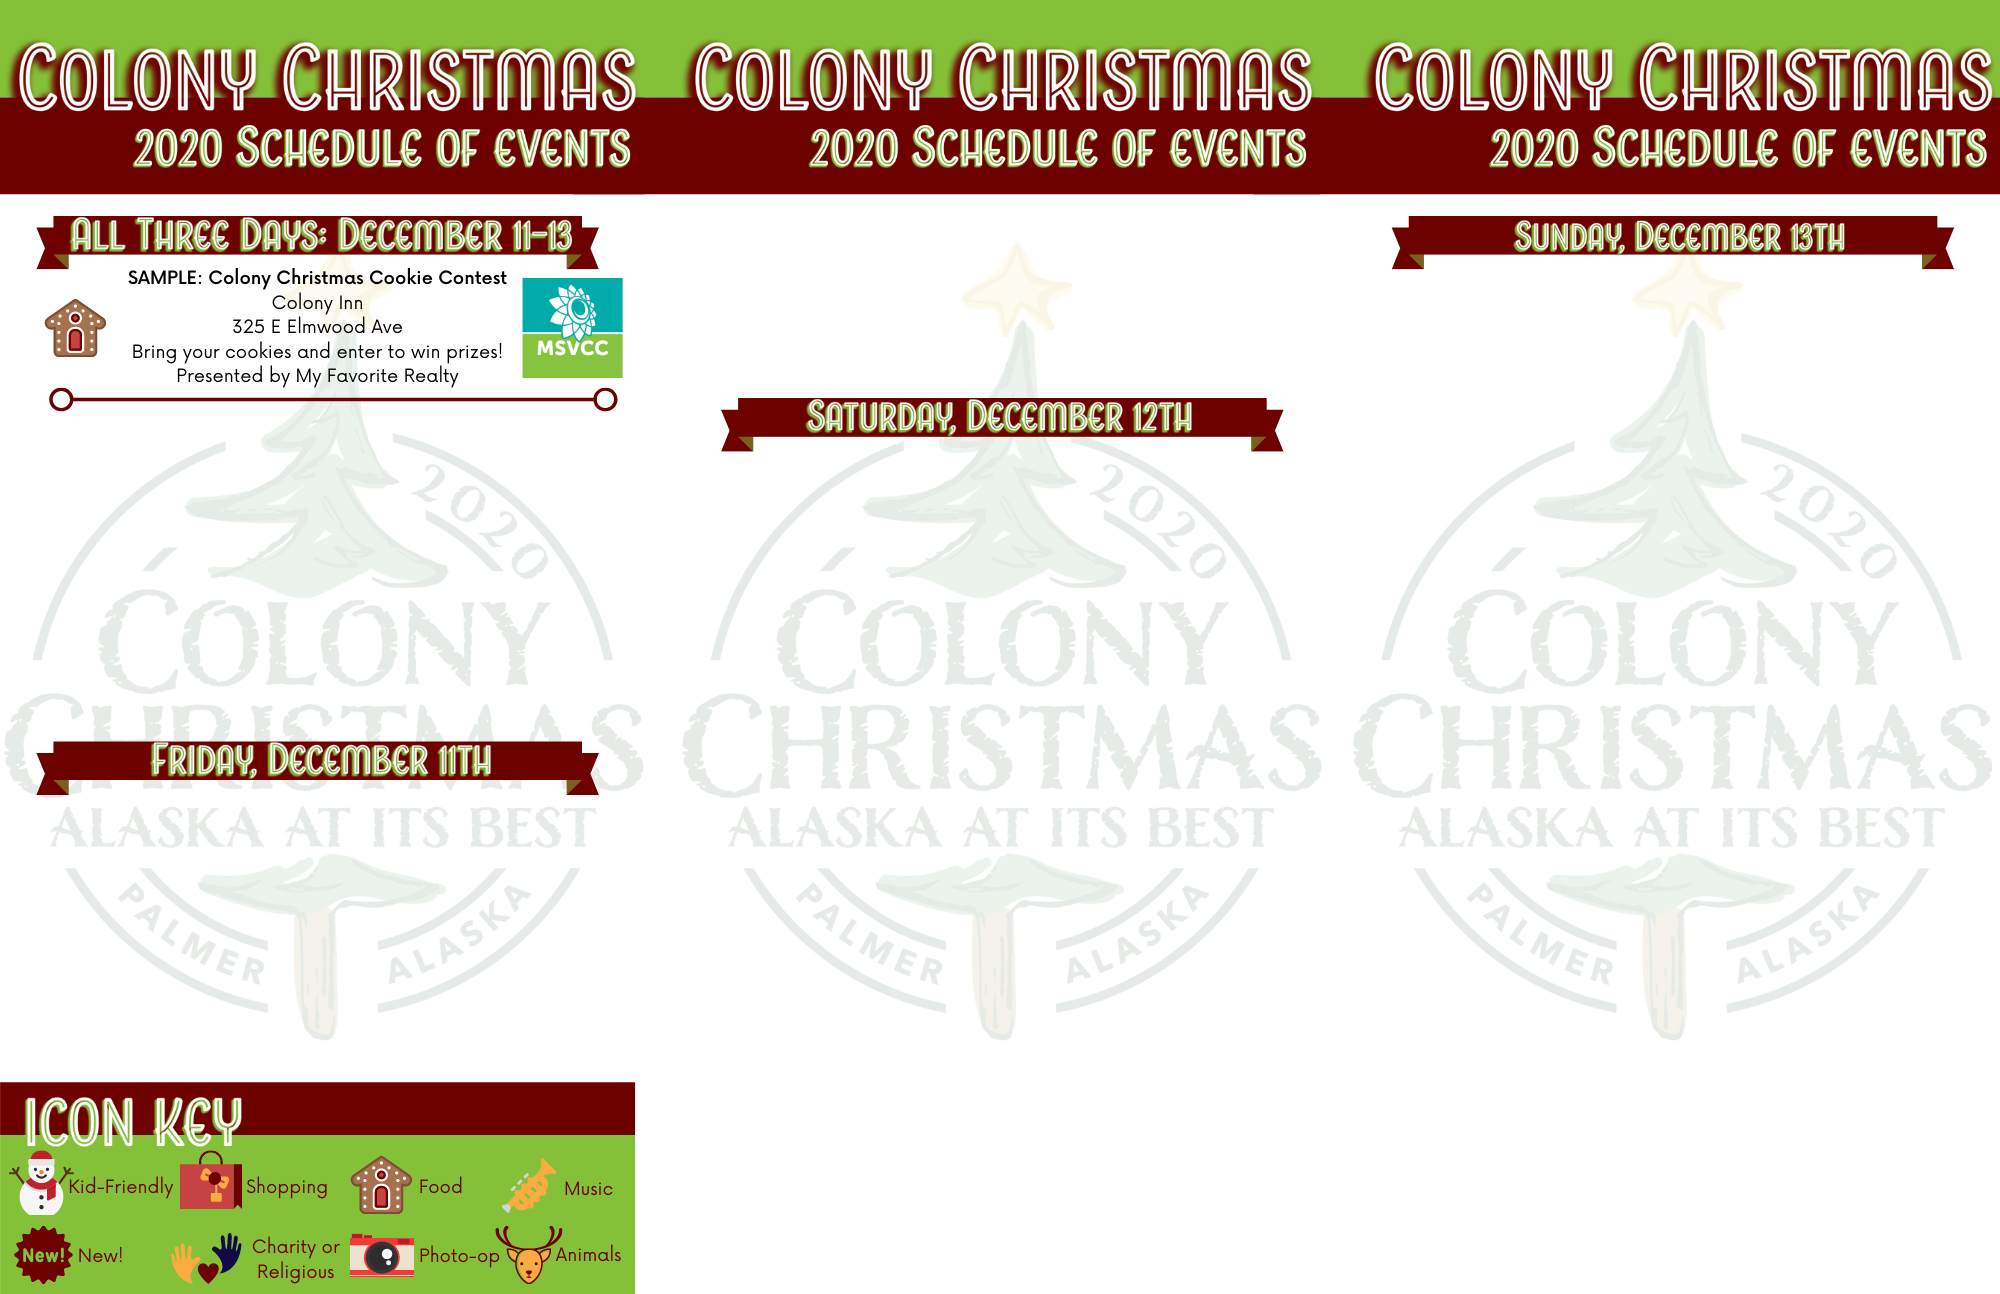 Colony Christmas 2020 Schedule of Events